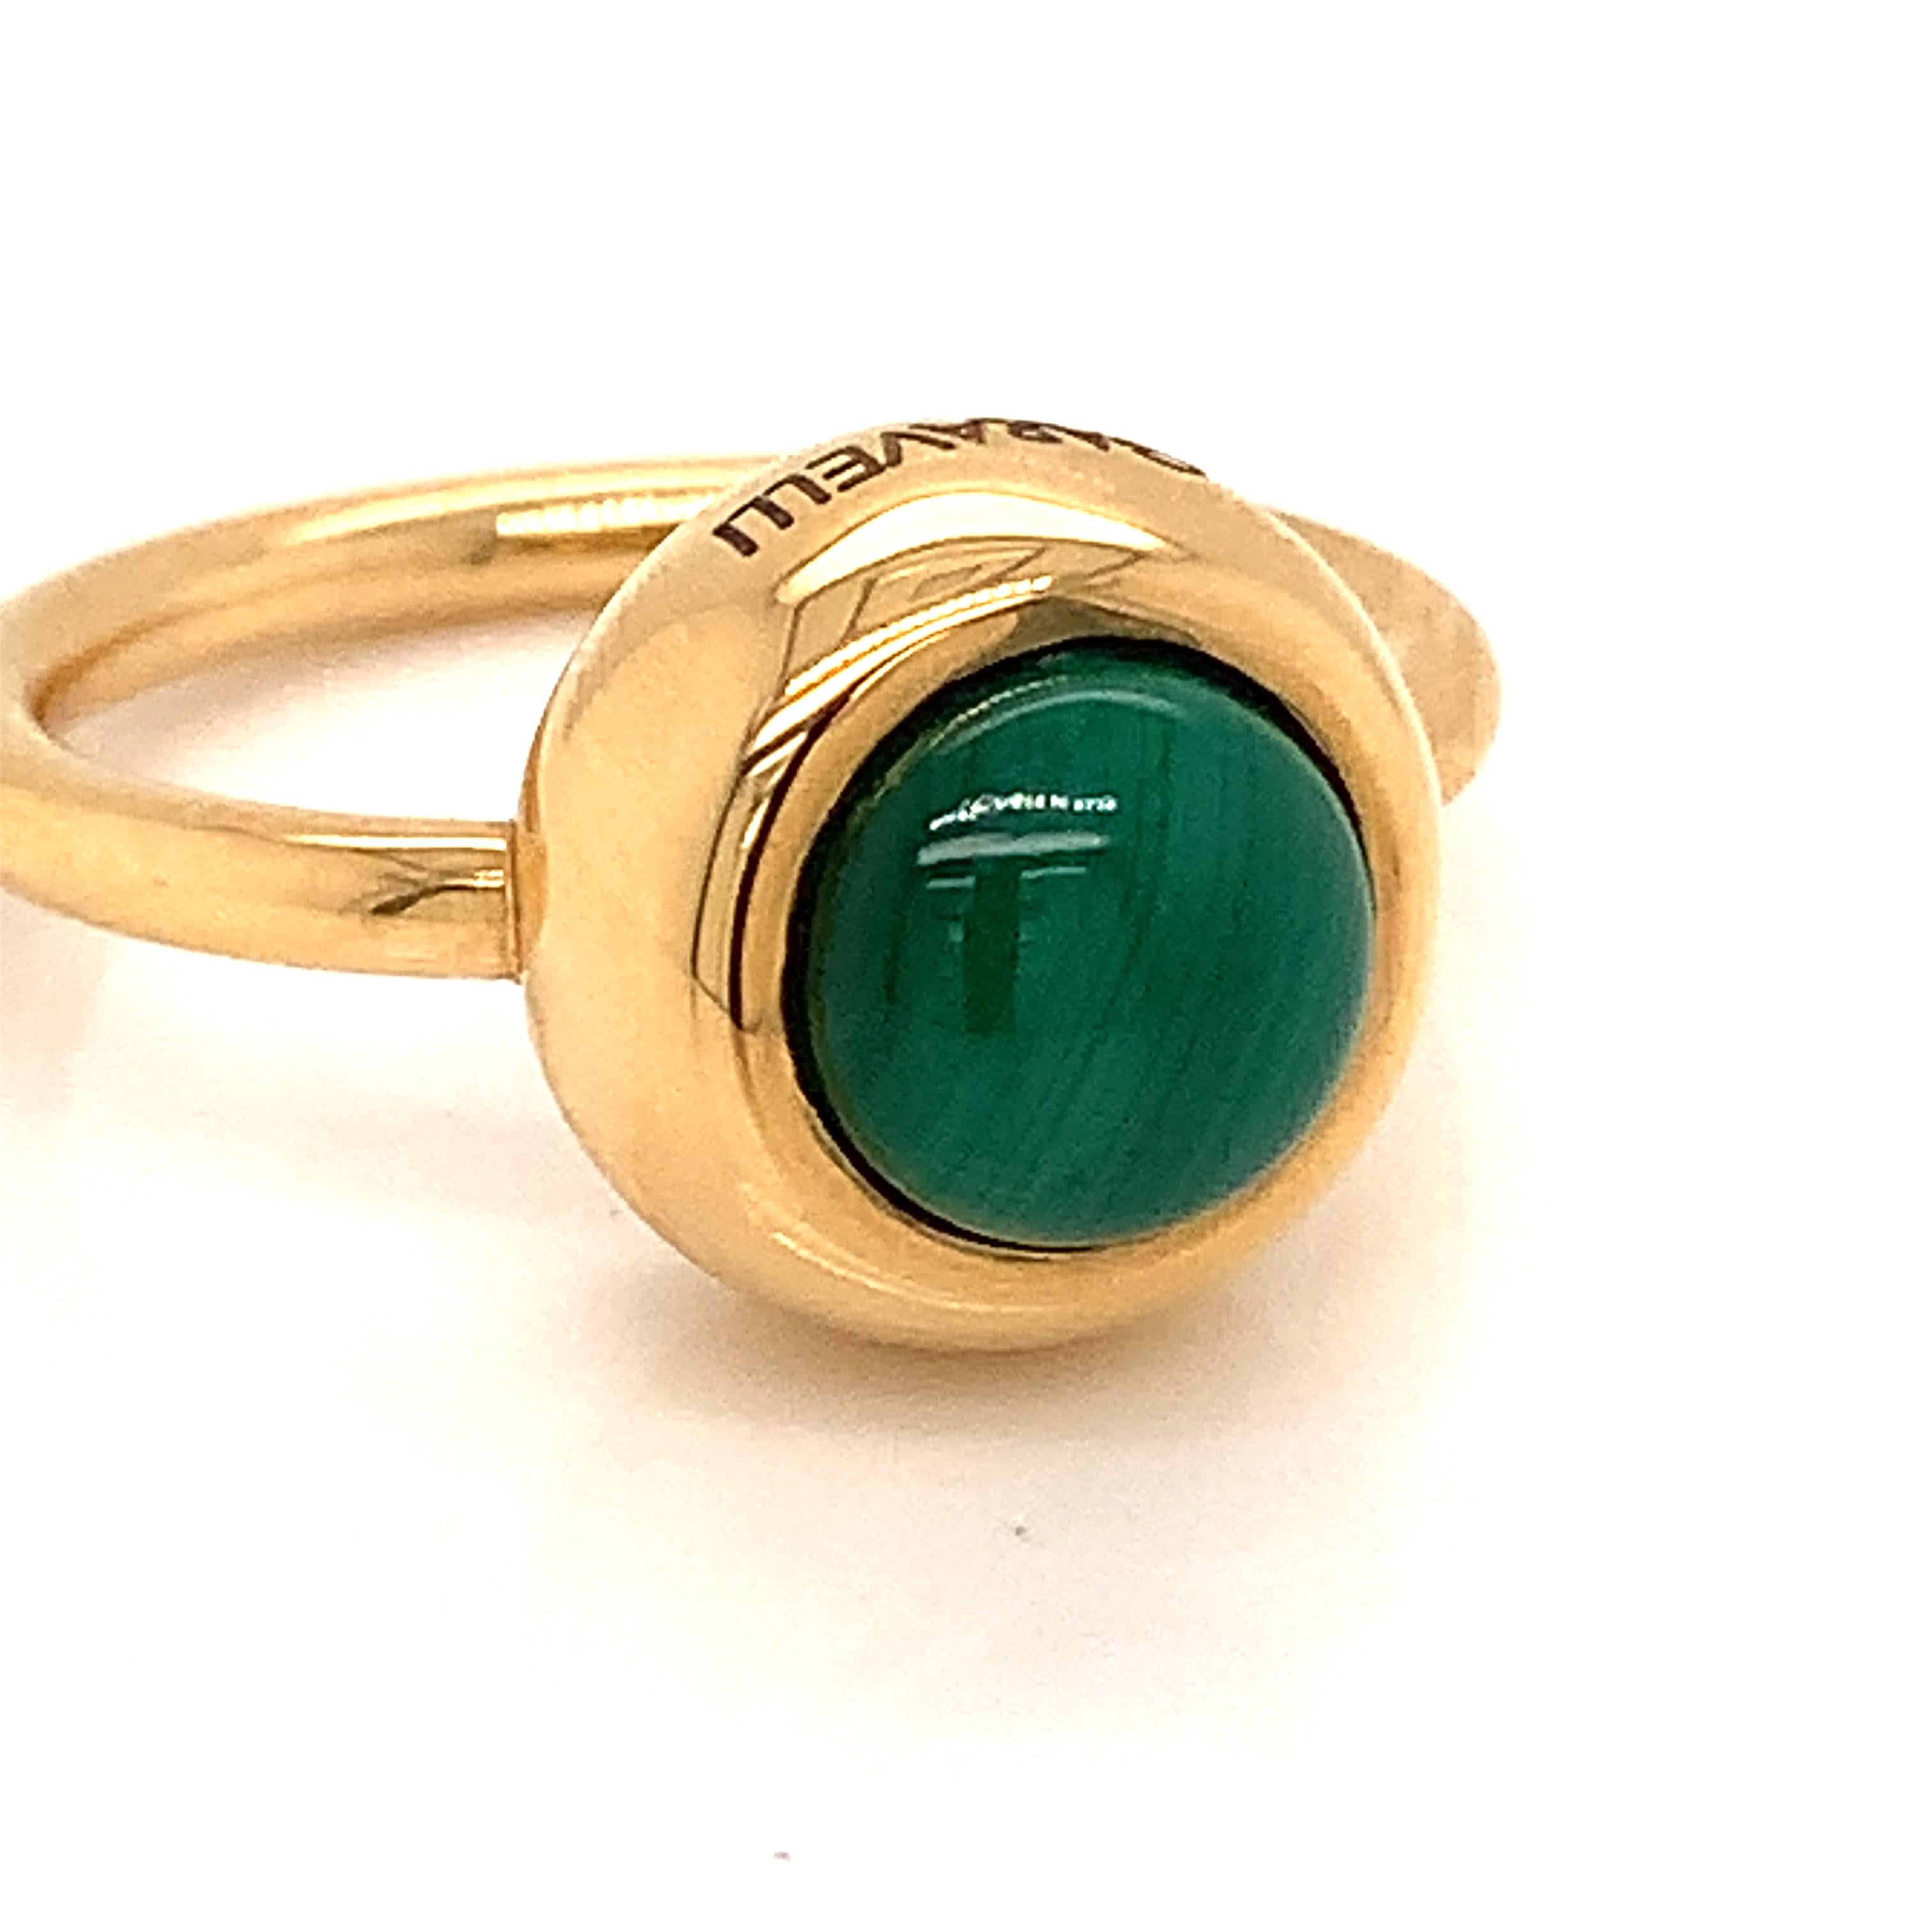 Garavelli 18 Karat Yellow Gold Malachite Giotto Collection Ring.  Ring size 54 US size 6.5-6.75
The gold head of the ring is diameter mm 12 height mm 7
The malachite ct :2.50  diameter mm 8 
18KT GOLD  :GR 7.50
Also available necklace or pendant and